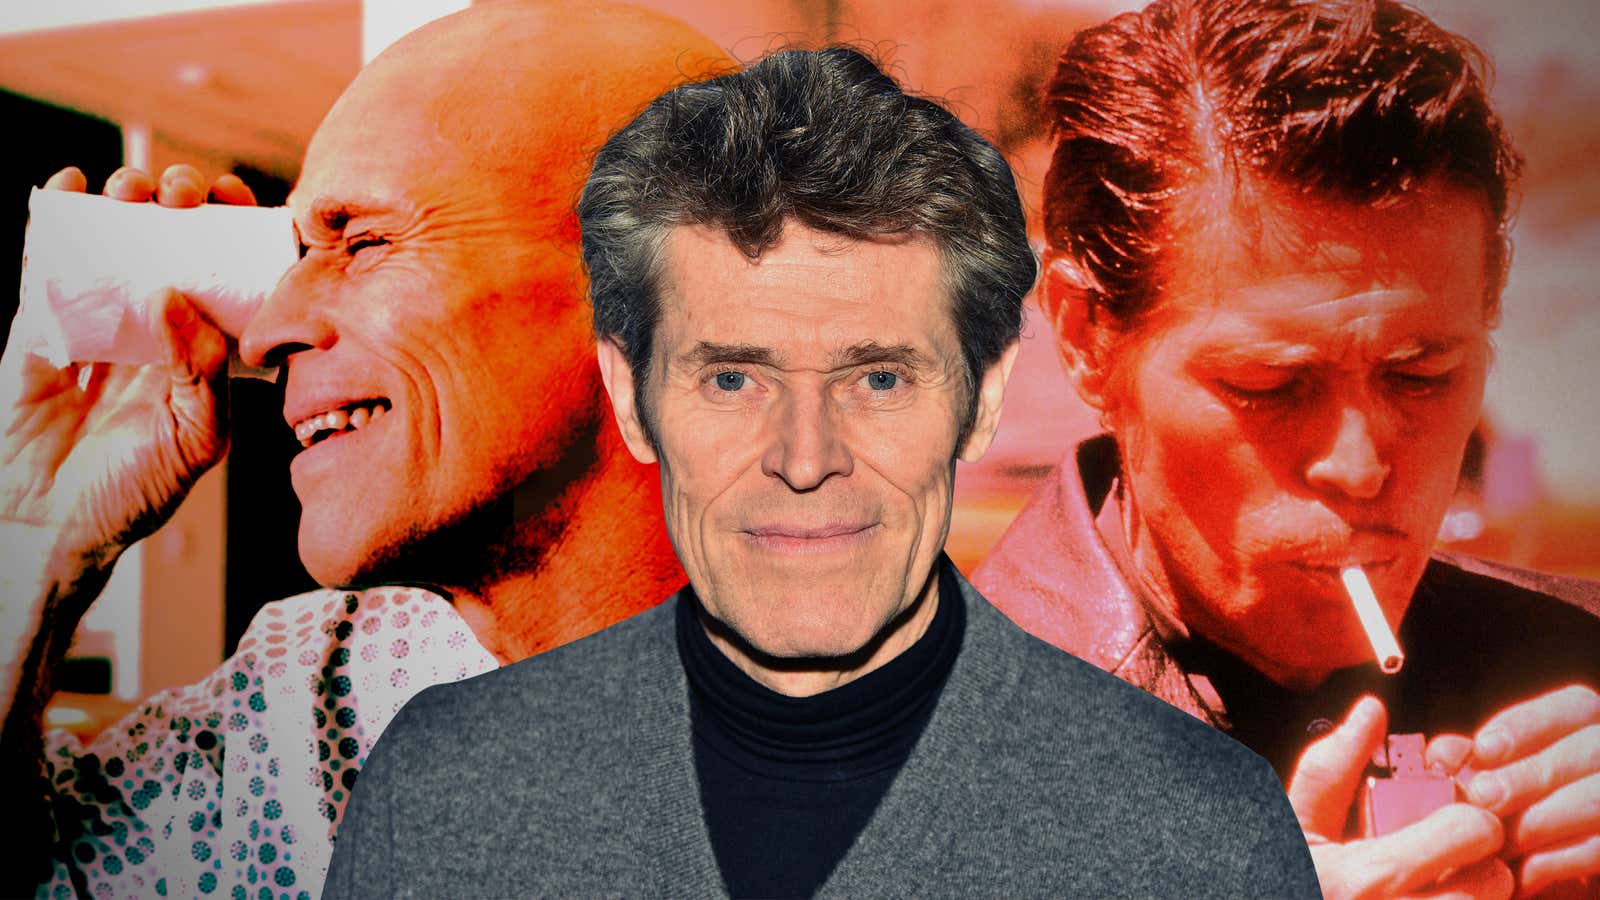 From left: Dafoe in My Hindu Friend (Photo: Rock Salt Releasingn), at a screening for Togo (Photo: Theo Wargo/Getty Images), and in Wild At Heart (Photo: Samuel Goldwyn Company/Getty Images)